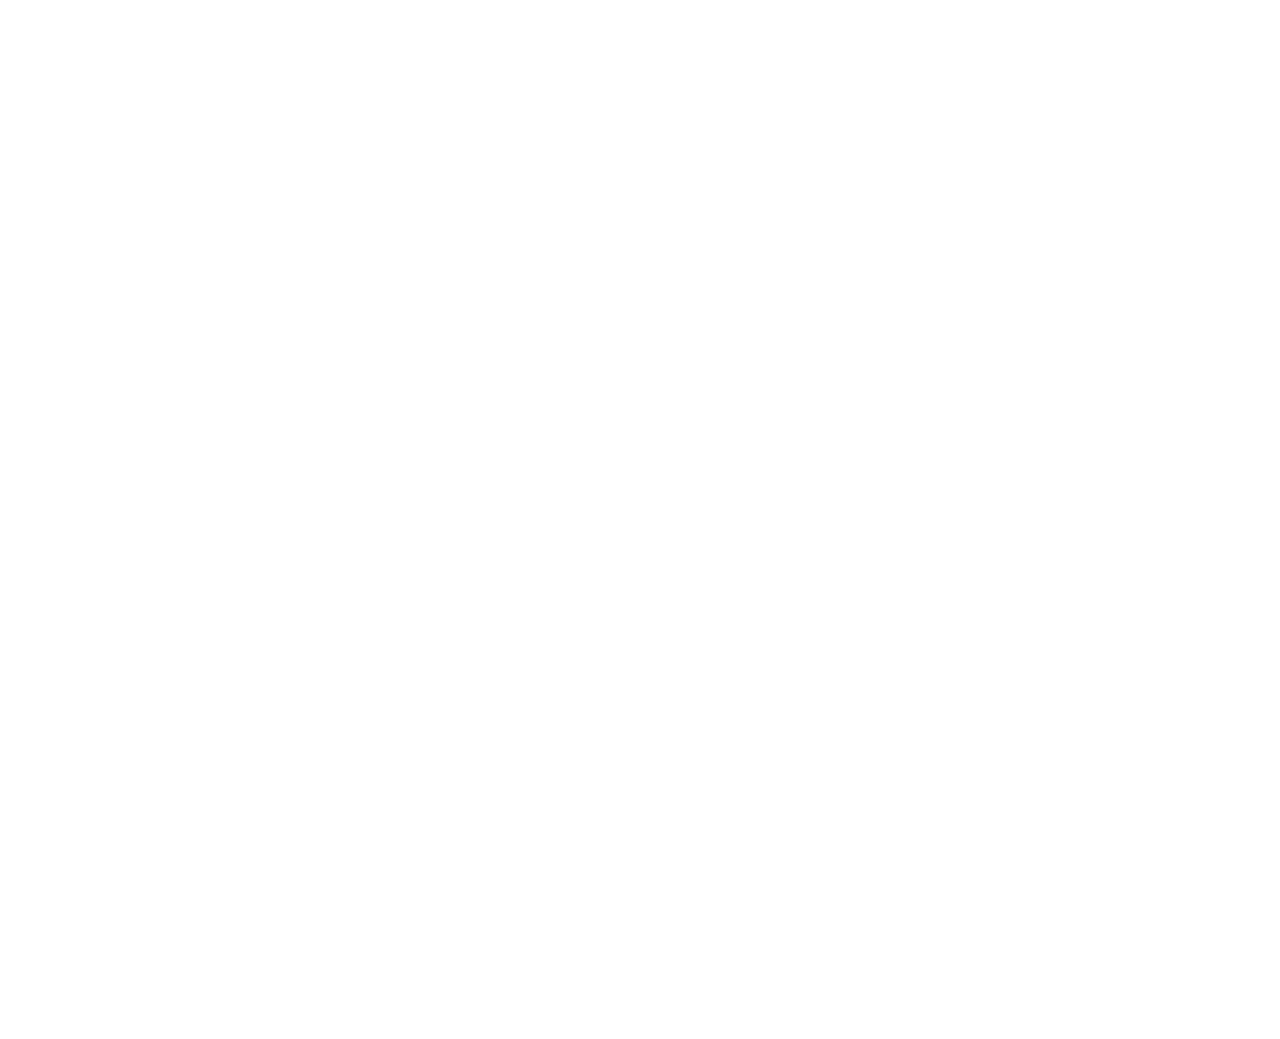 Mexican Munchie Box 's web page